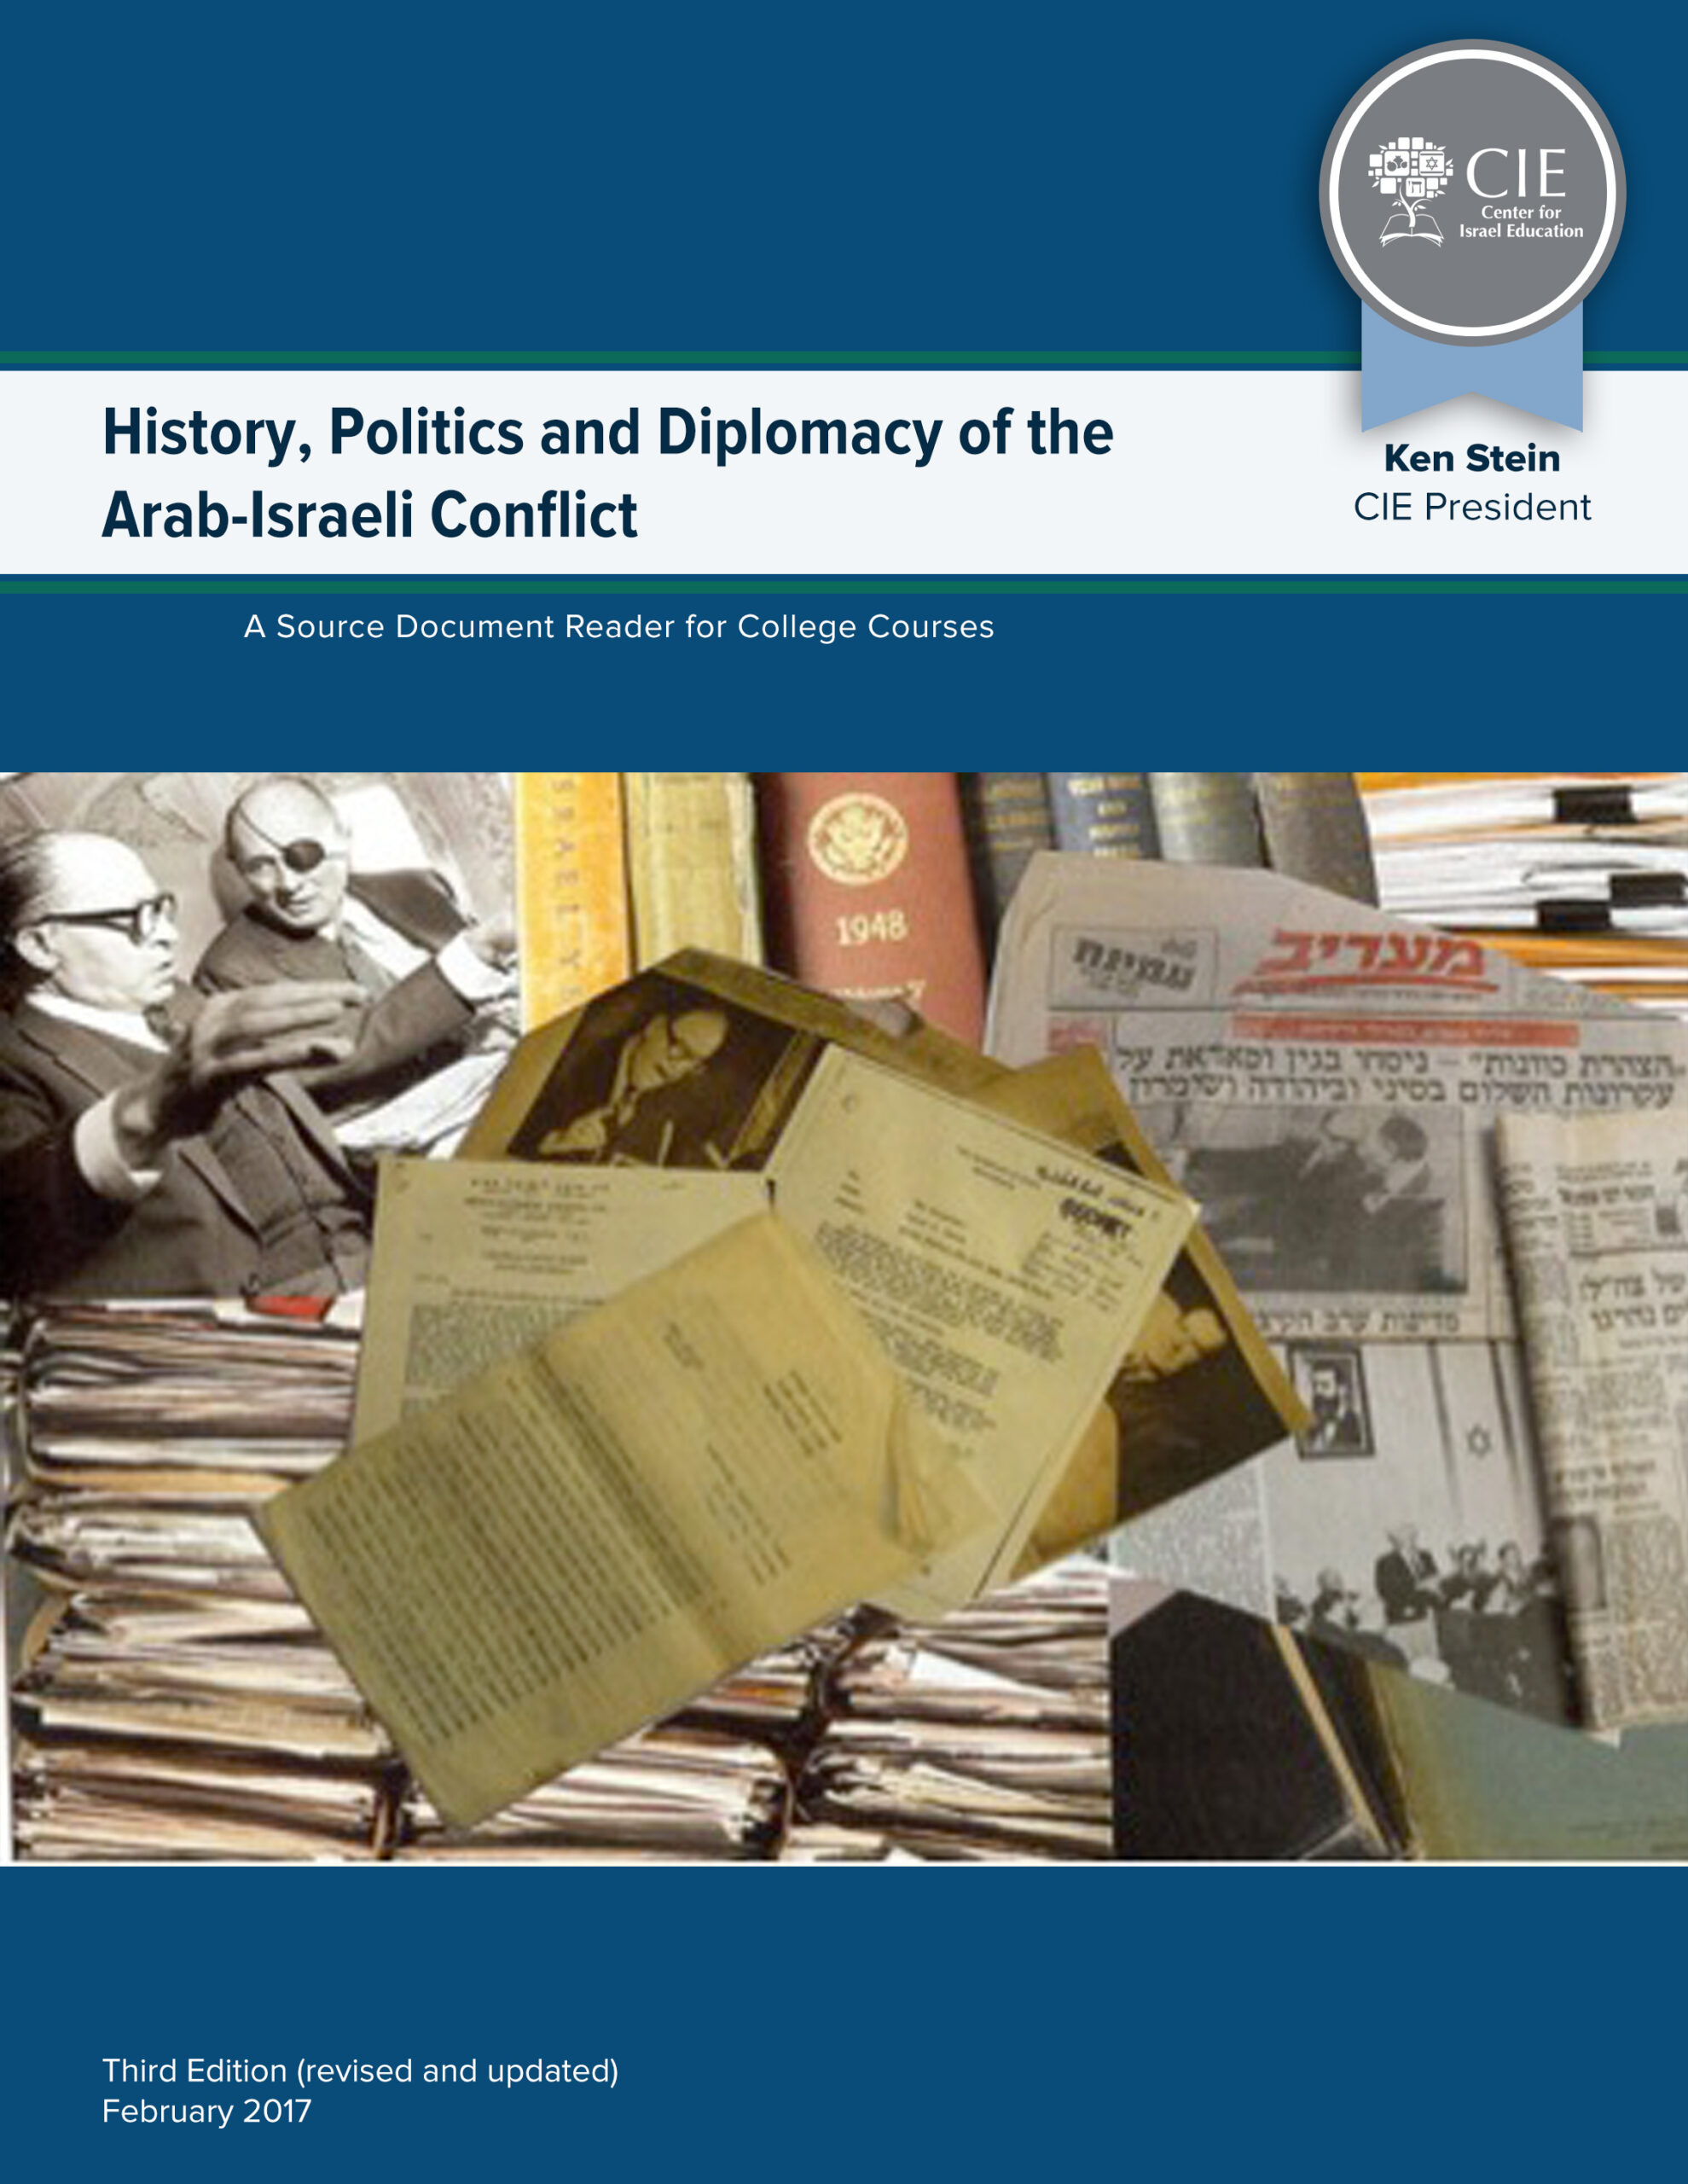 History, Politics and Diplomacy of the Arab-Israeli Conflict